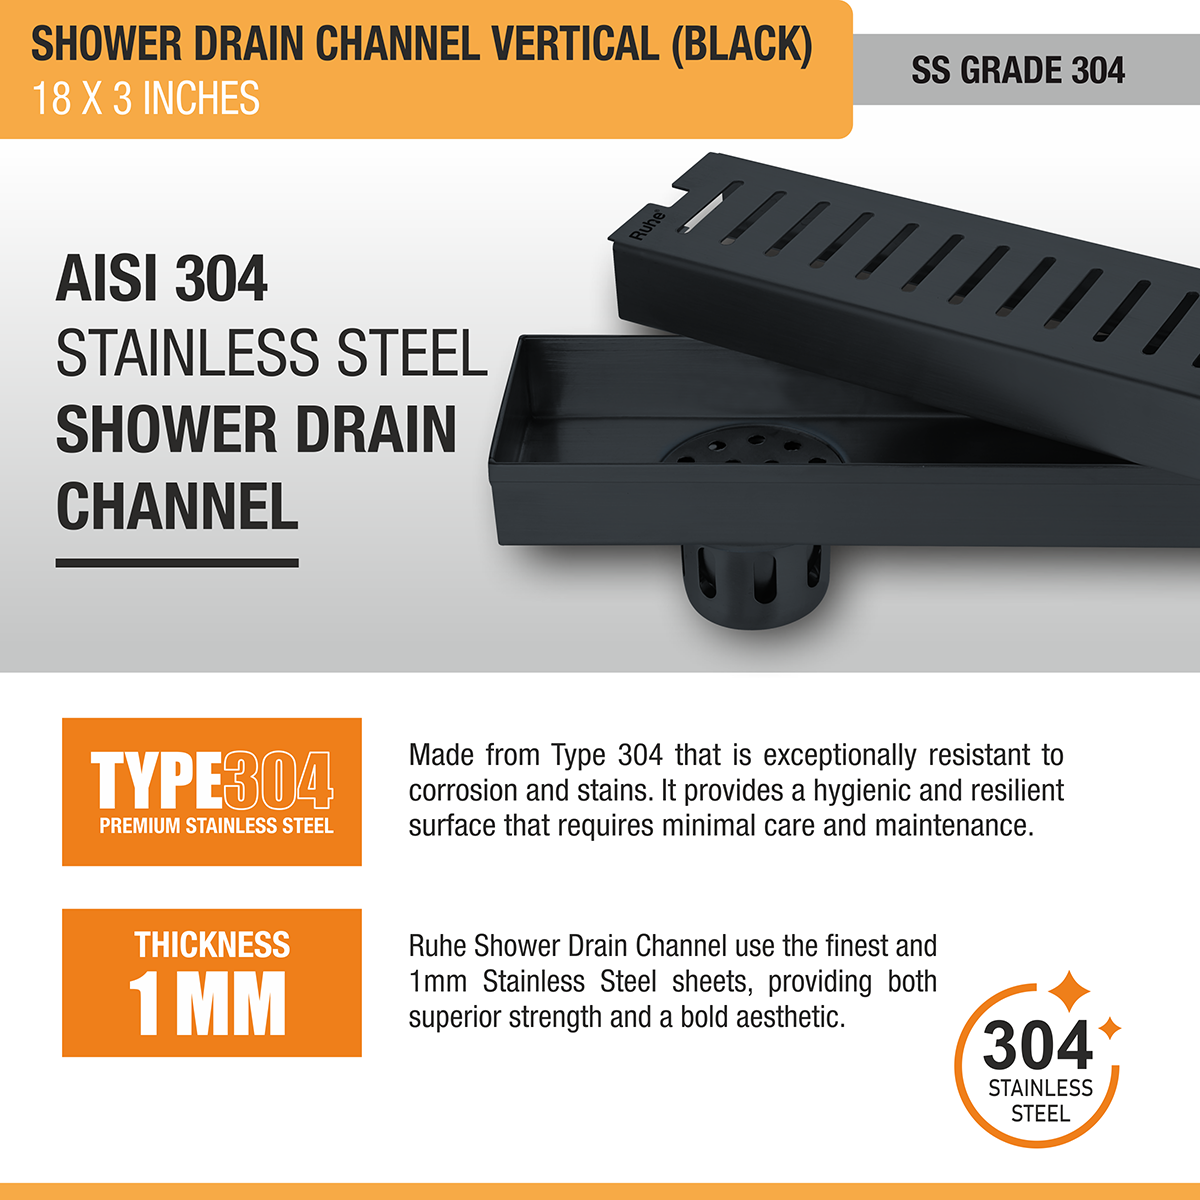 Vertical Shower Drain Channel (18 x 3 Inches) Black PVD Coated stainless steel